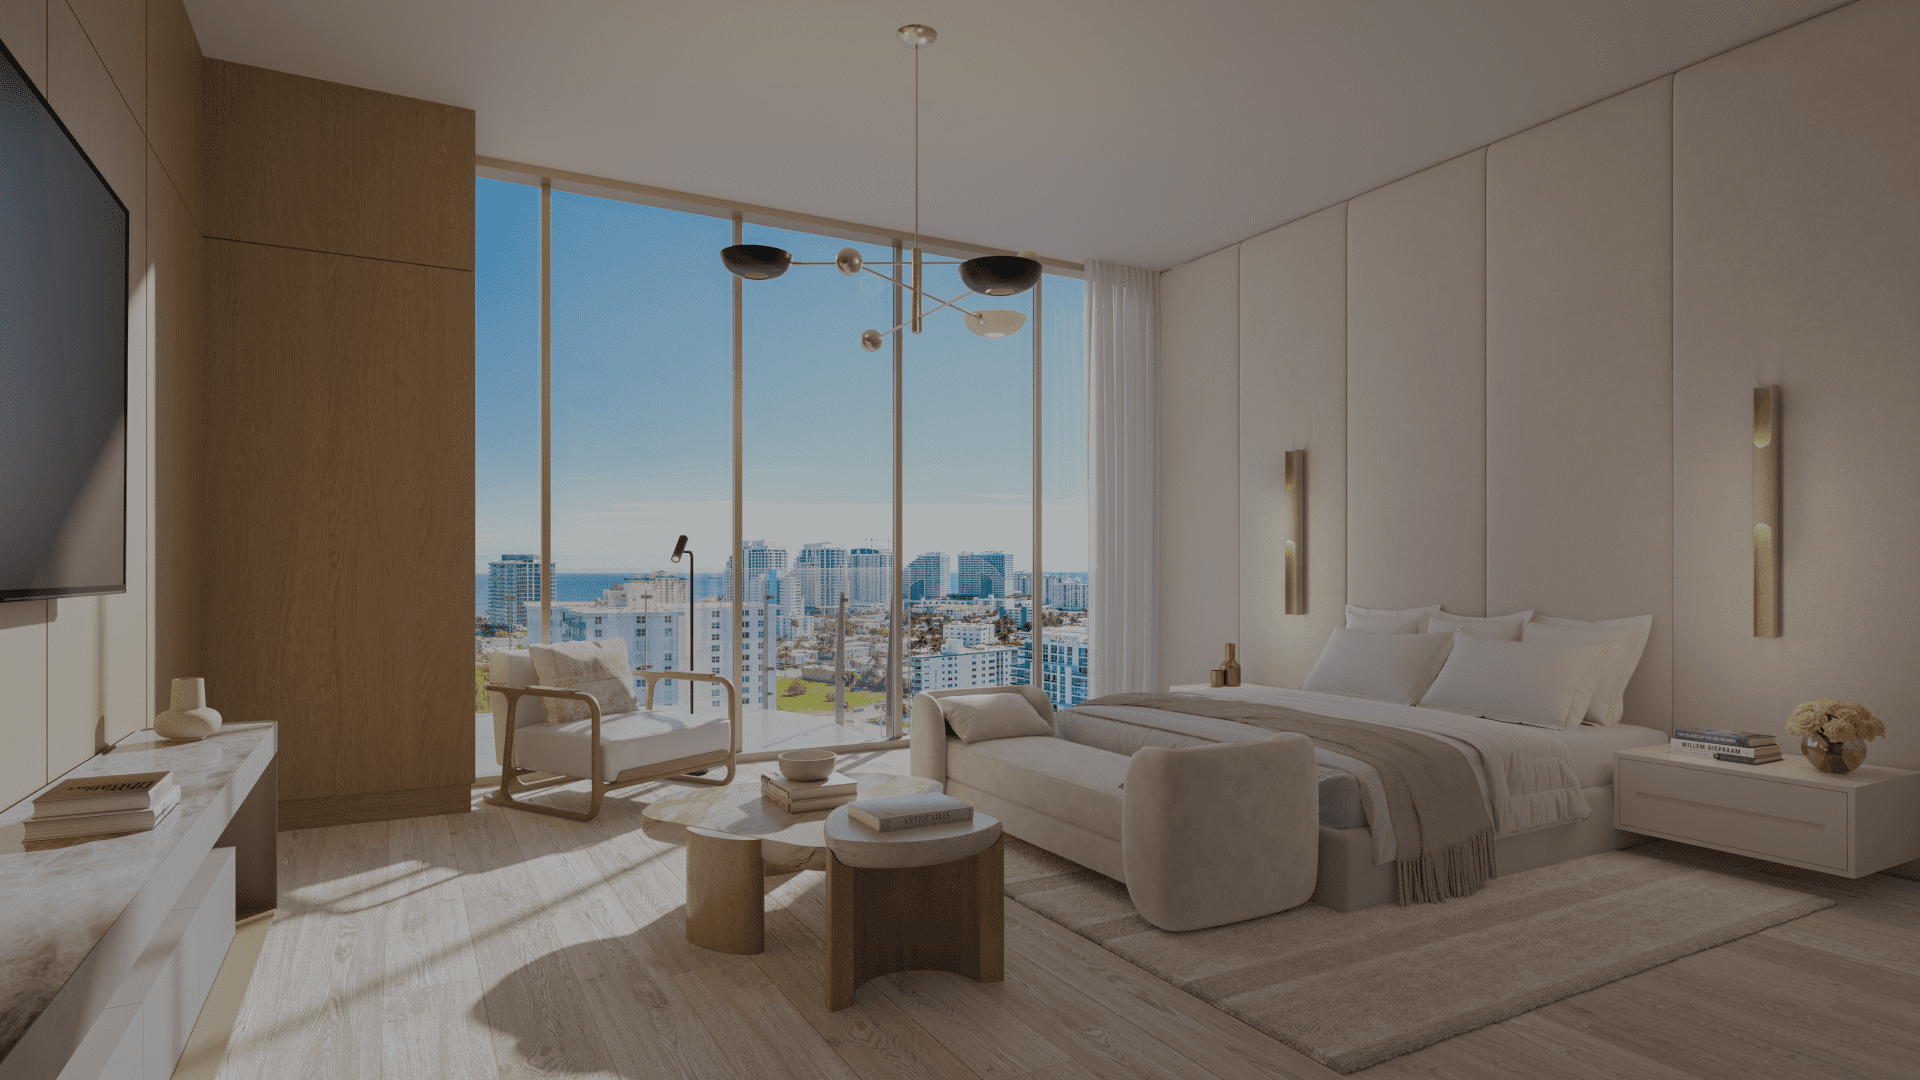 Bedroom with the city and ocean view at Sage Intracoastal Residences